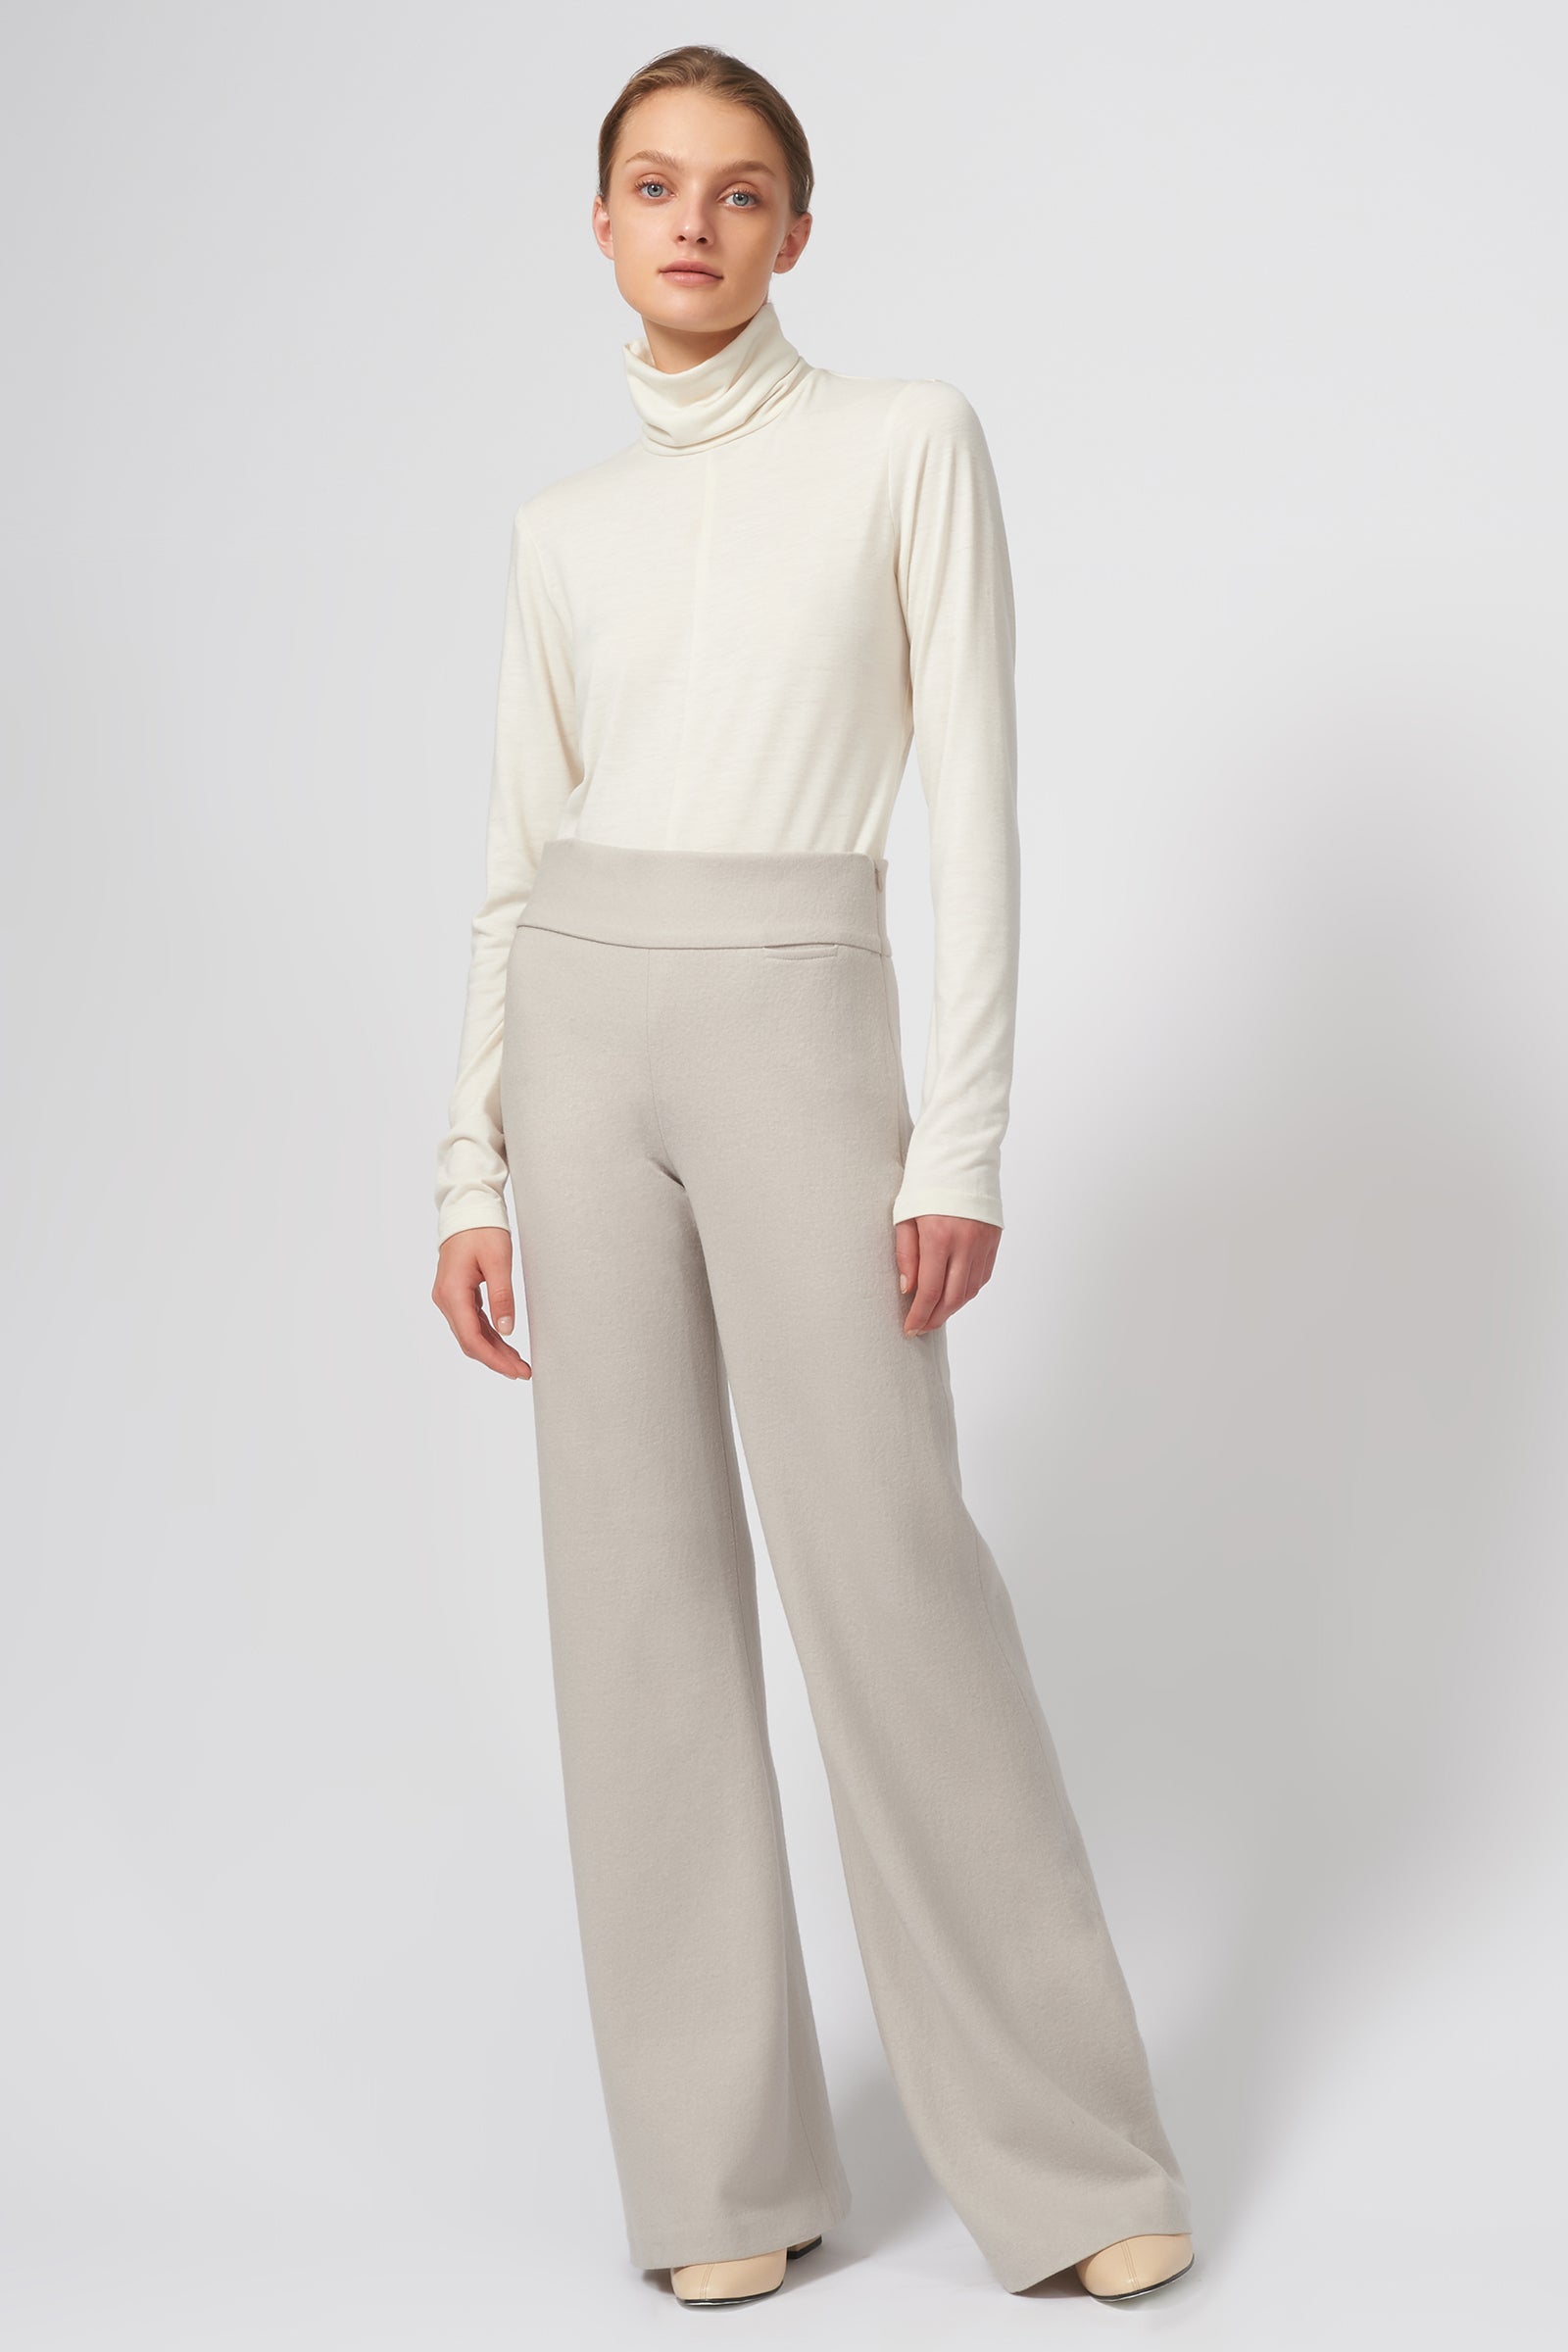 Felted Jersey Wide Leg Pant in Mink Made in 100% Japanese Wool – KAL RIEMAN